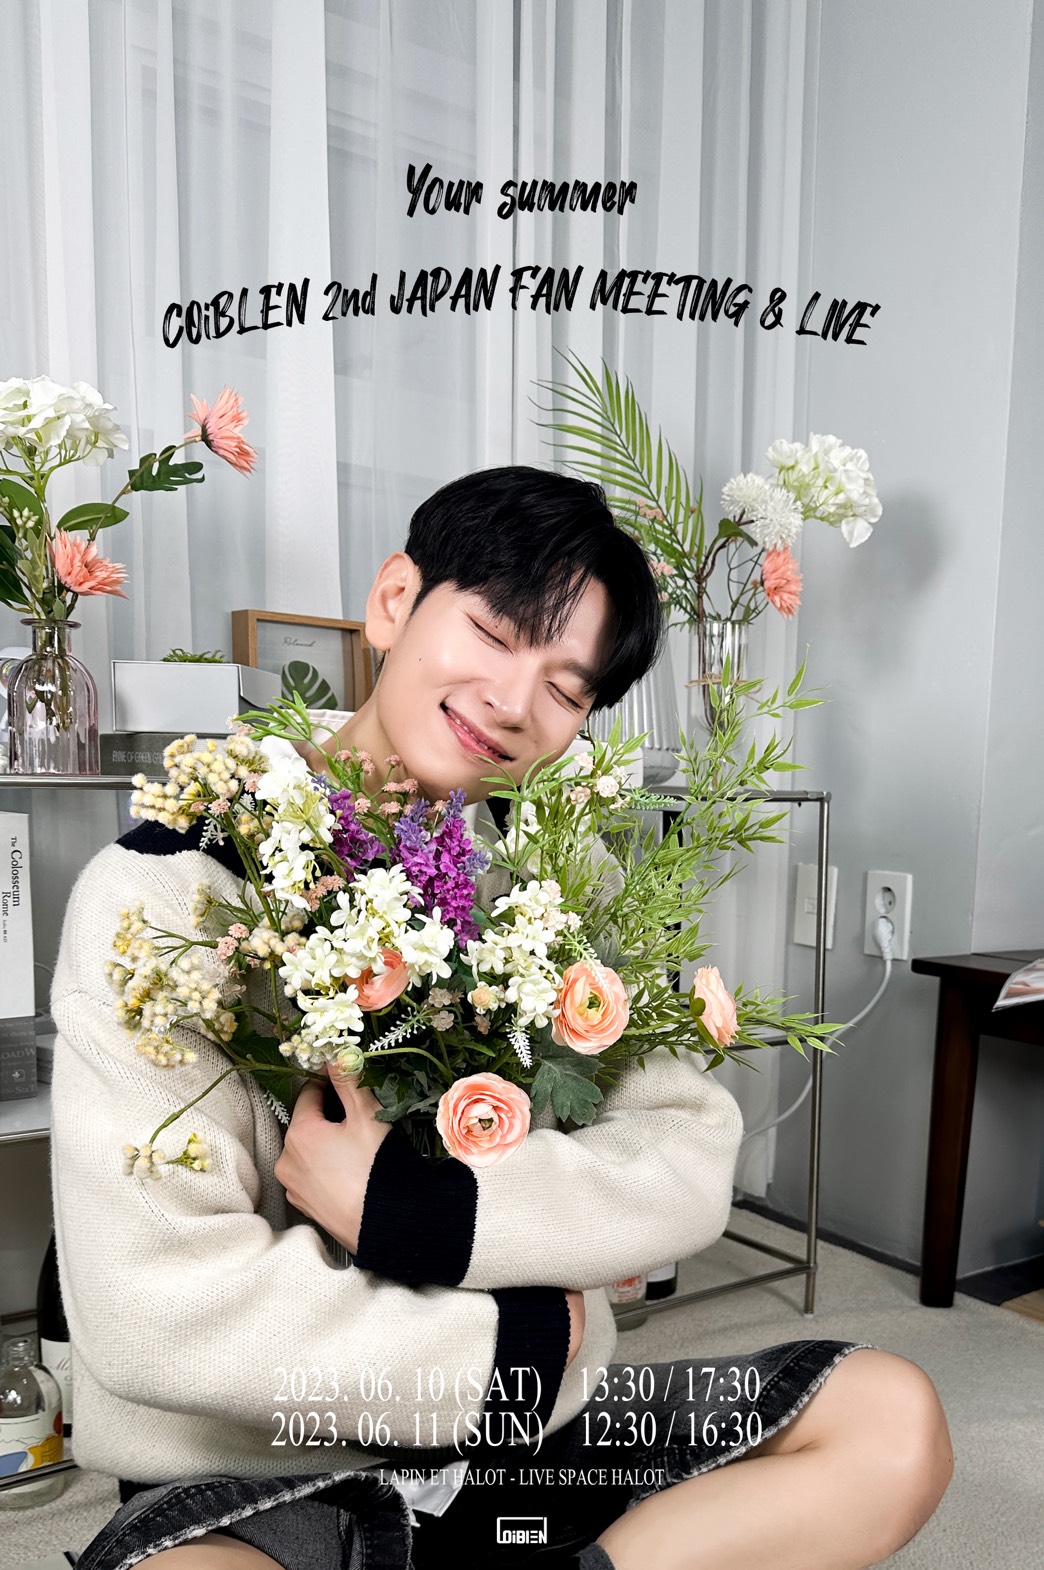 COiBLEN 2nd JAPAN FAN MEETING&LIVE-Your summer- [2部]